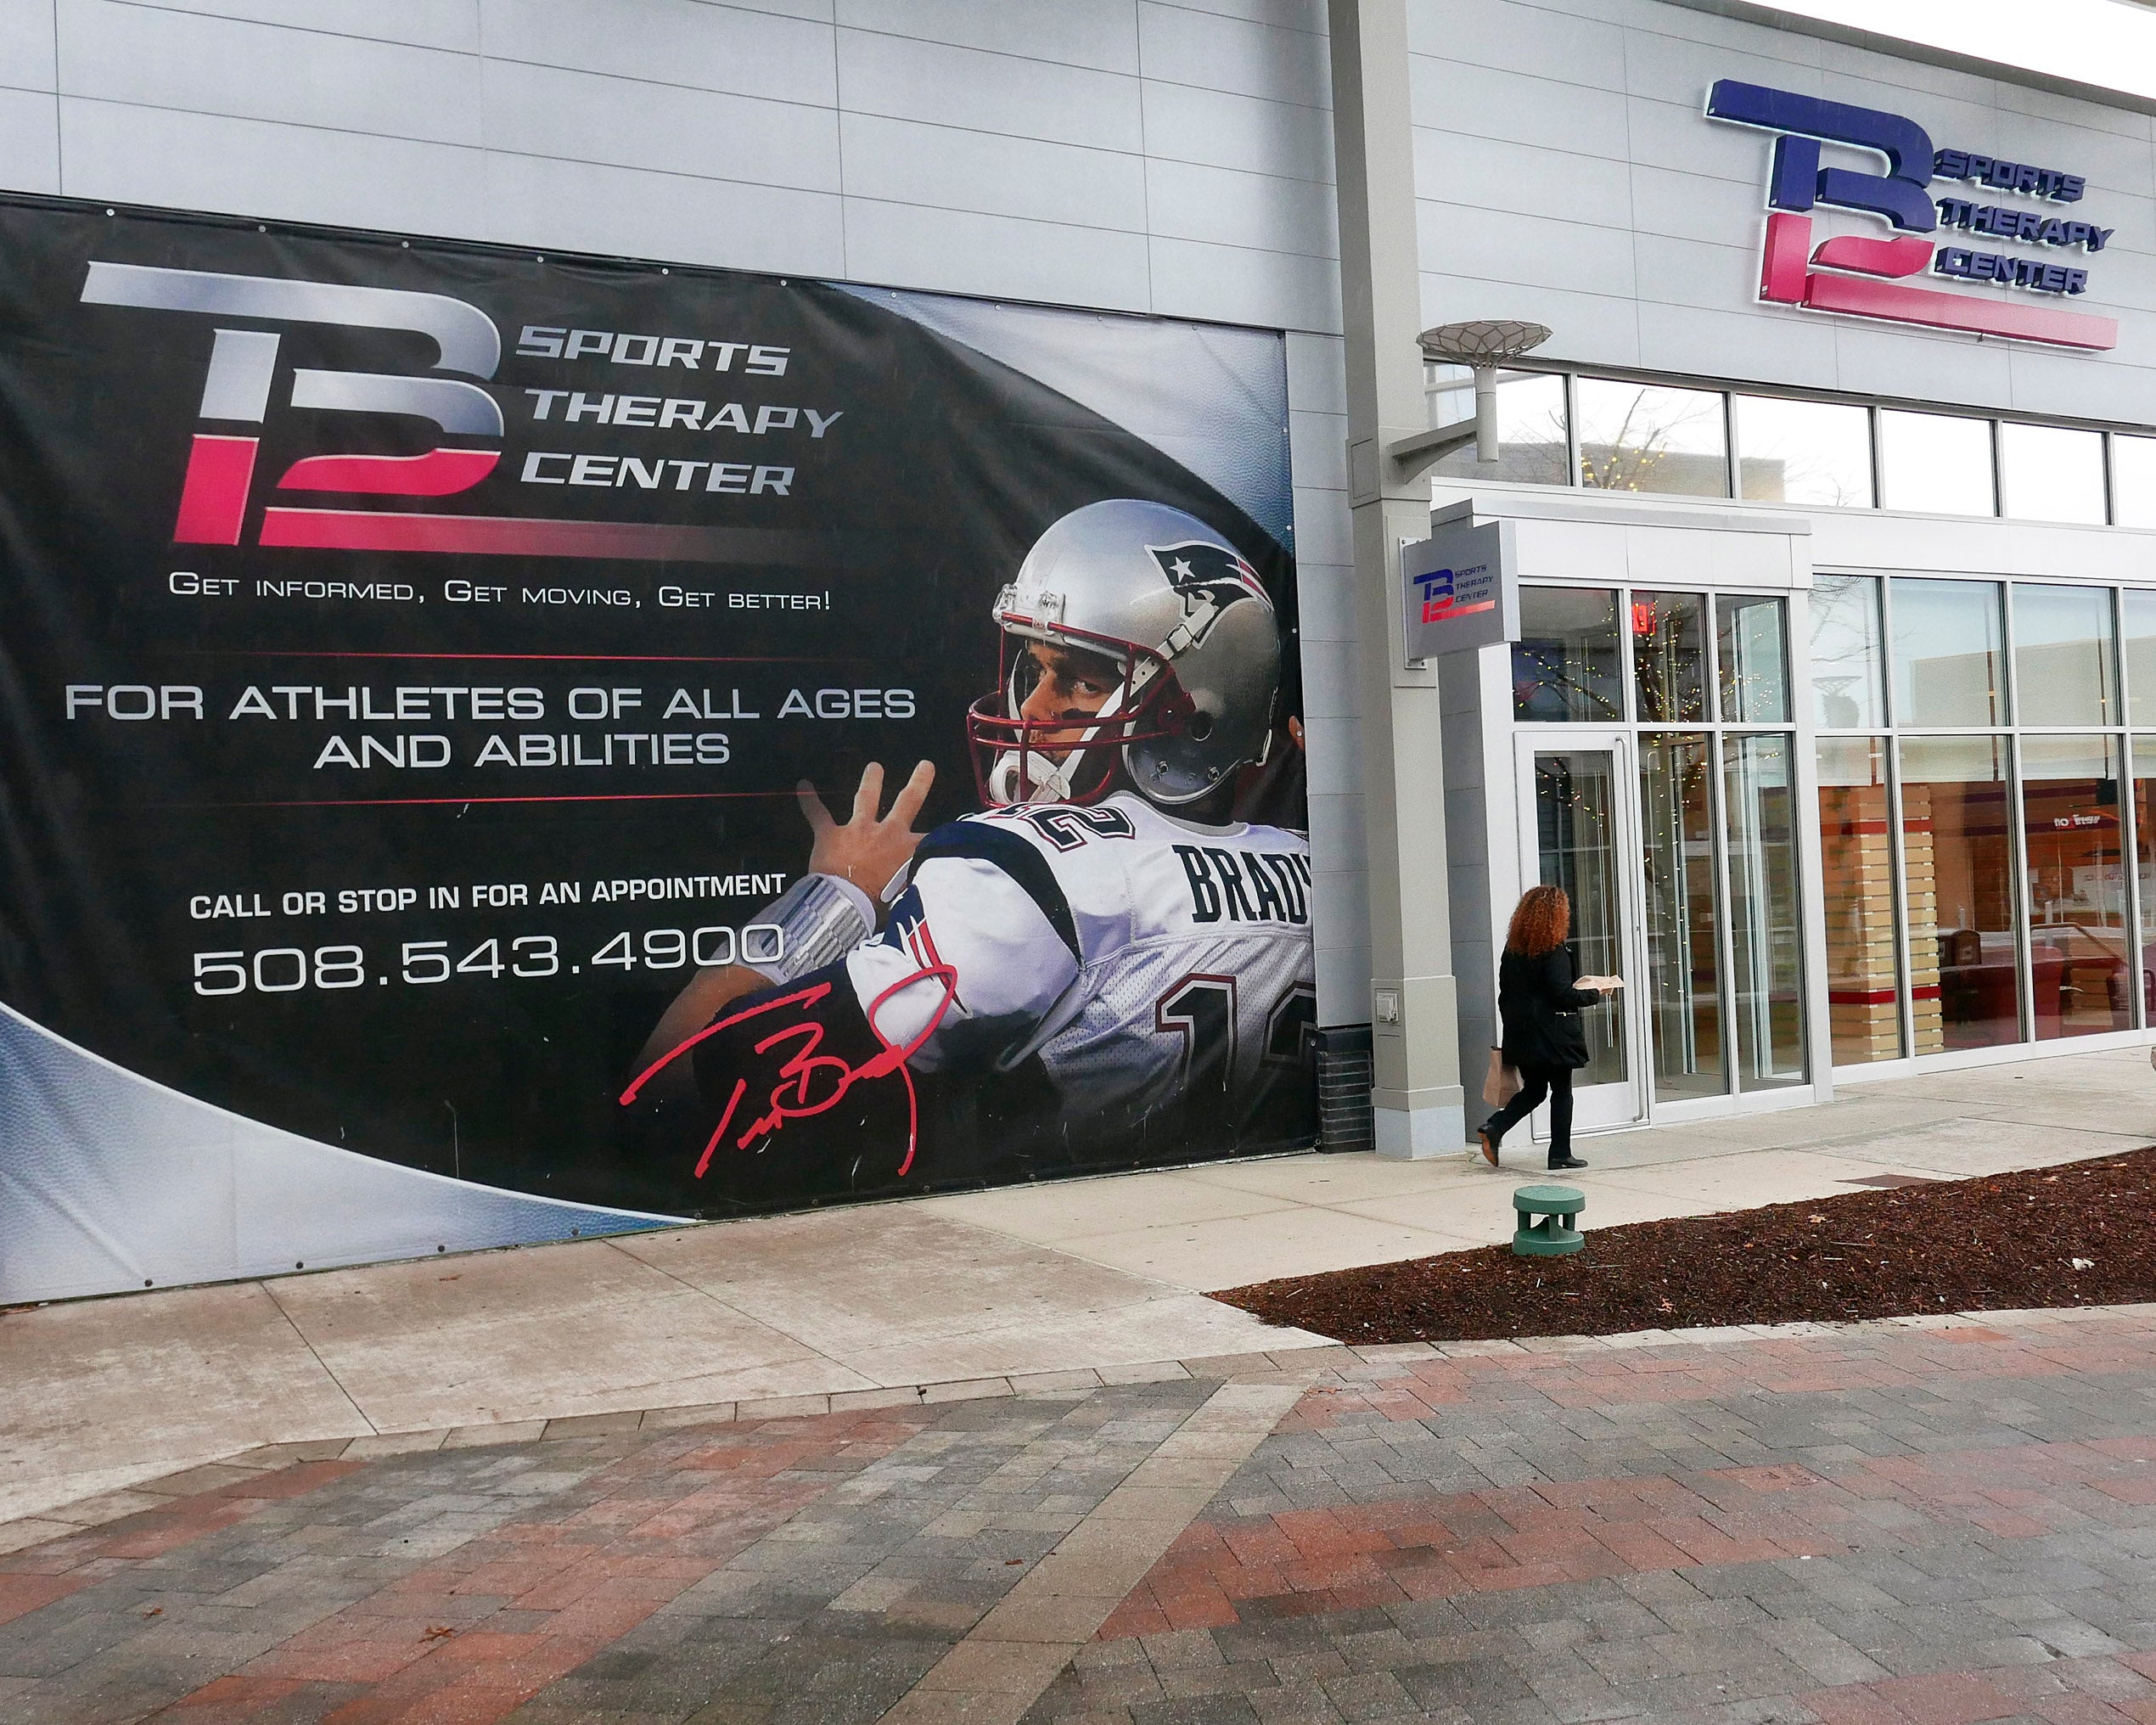 Seven things we learned from Episode 1 of the Tom Brady documentary, 'Man  in the Arena' - The Boston Globe